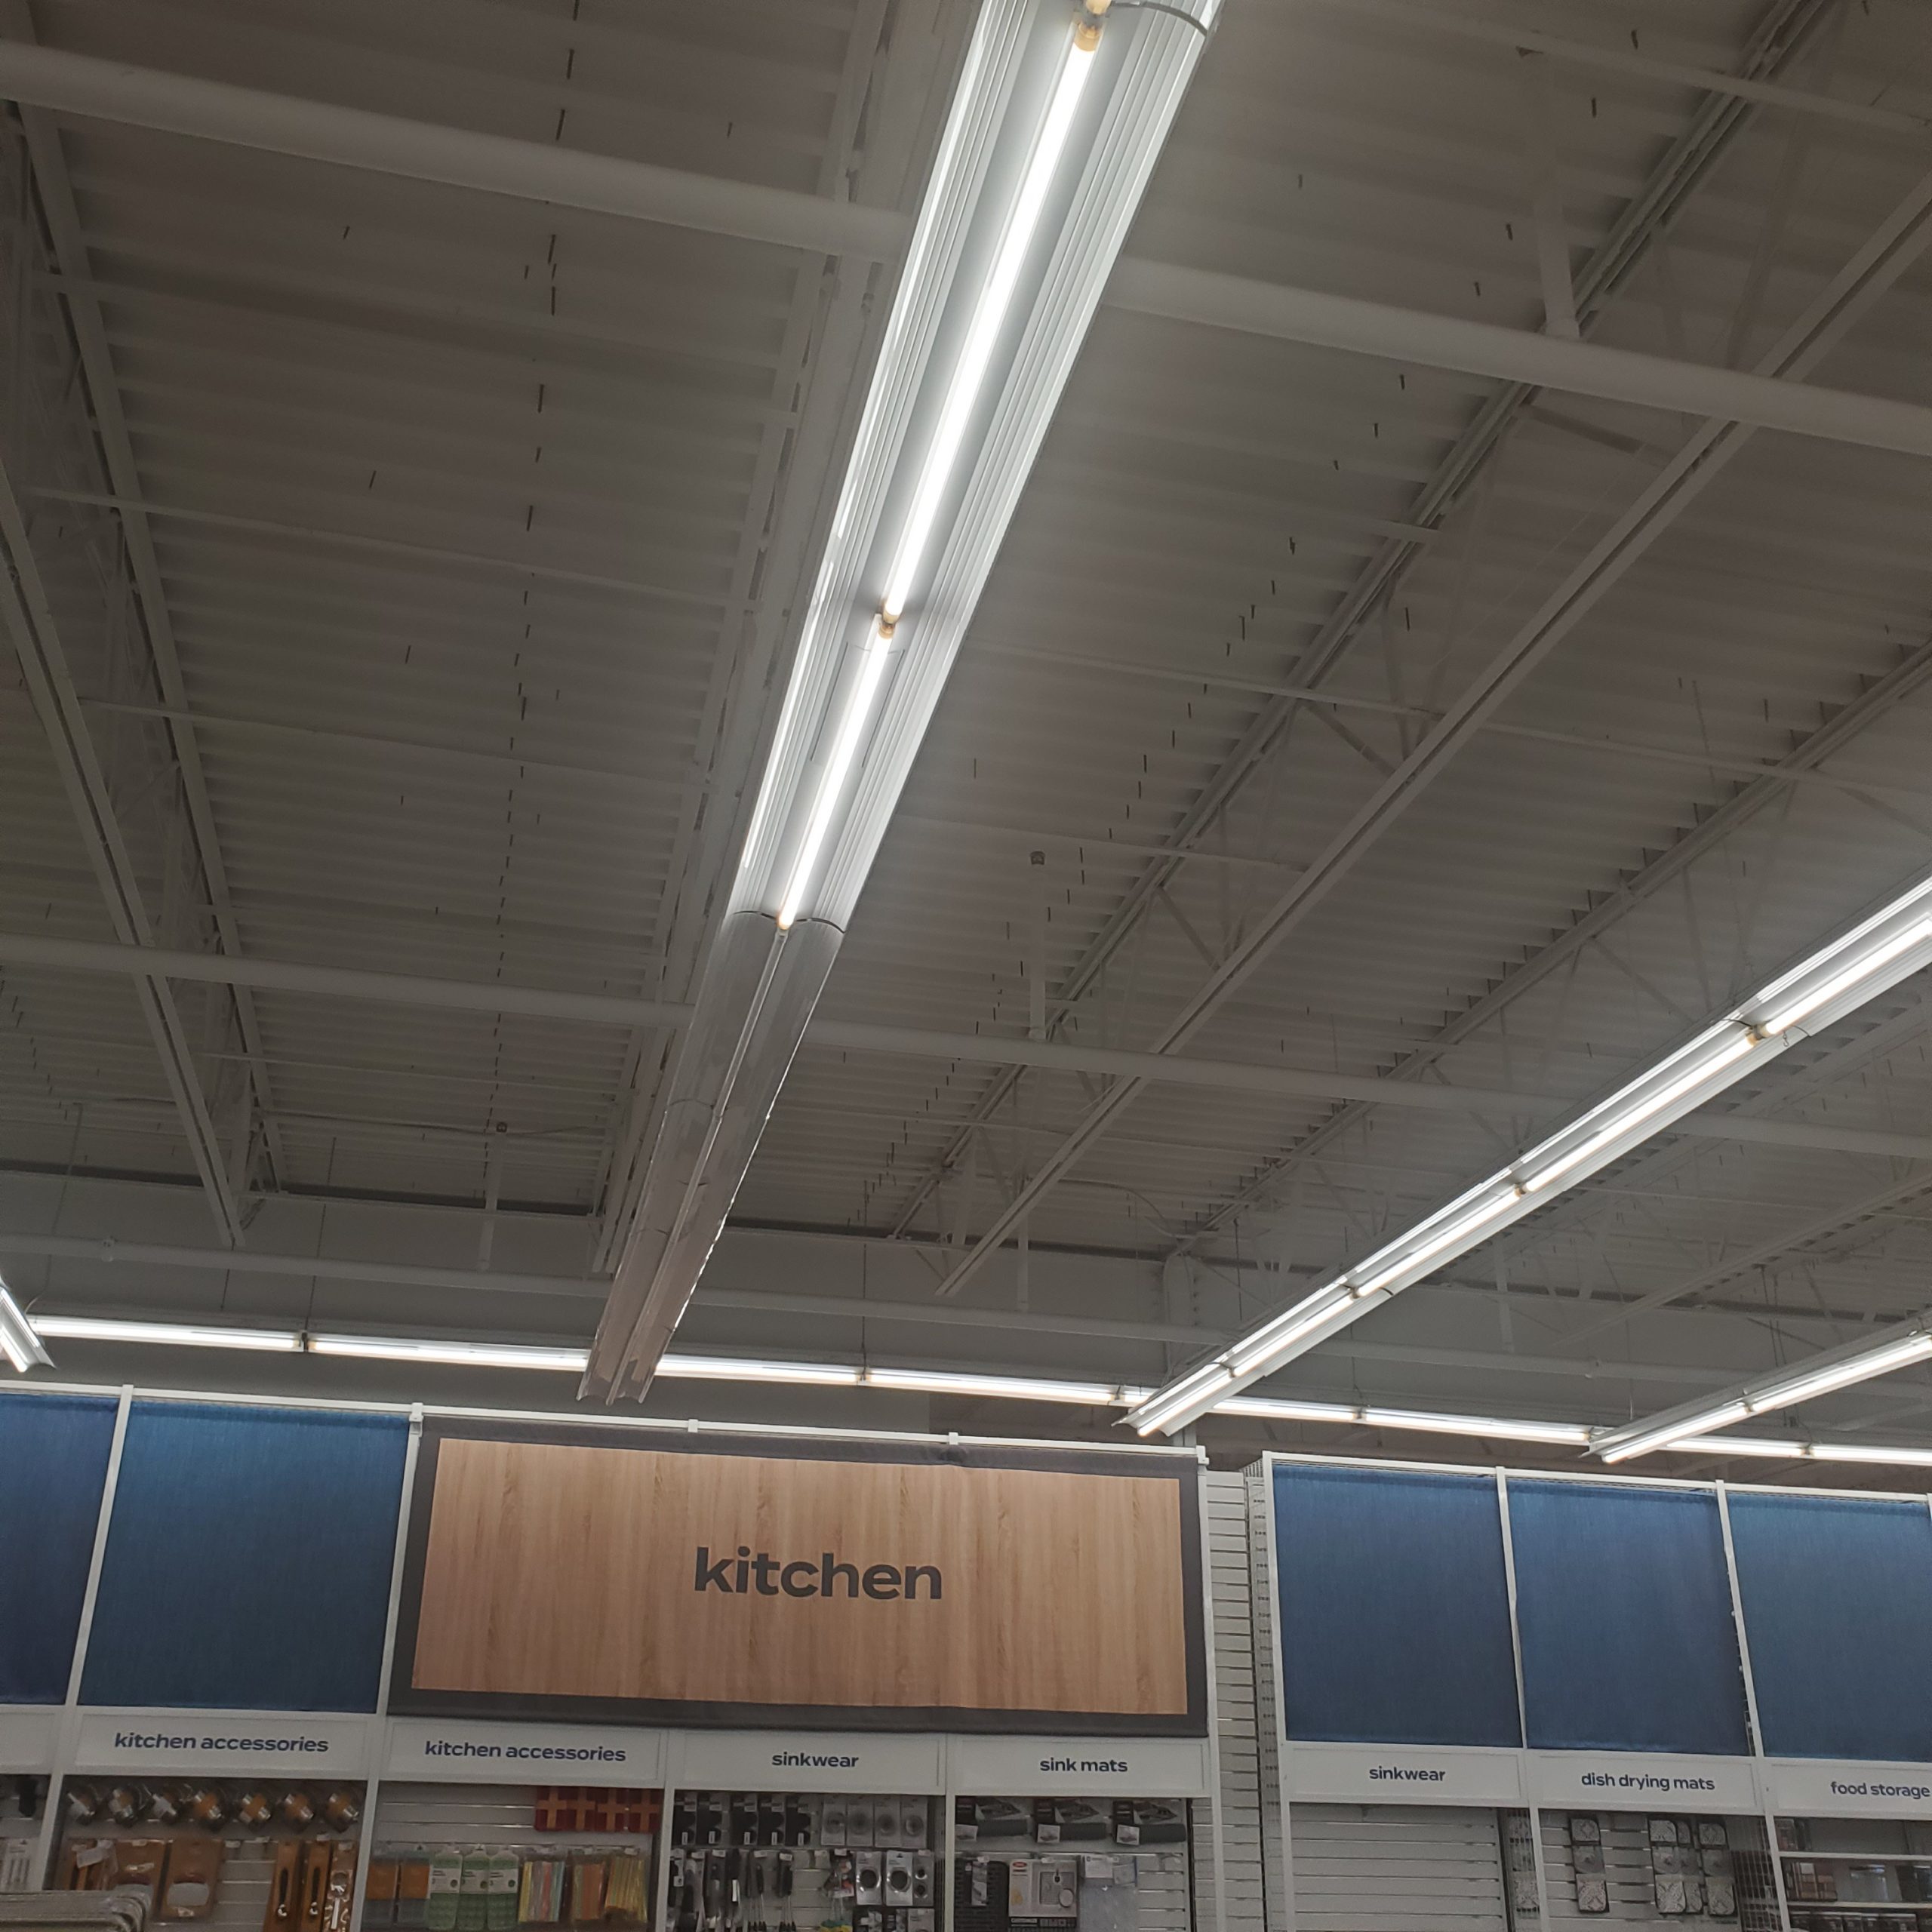 An additional photo of failed LED tubes inside a big box retail store